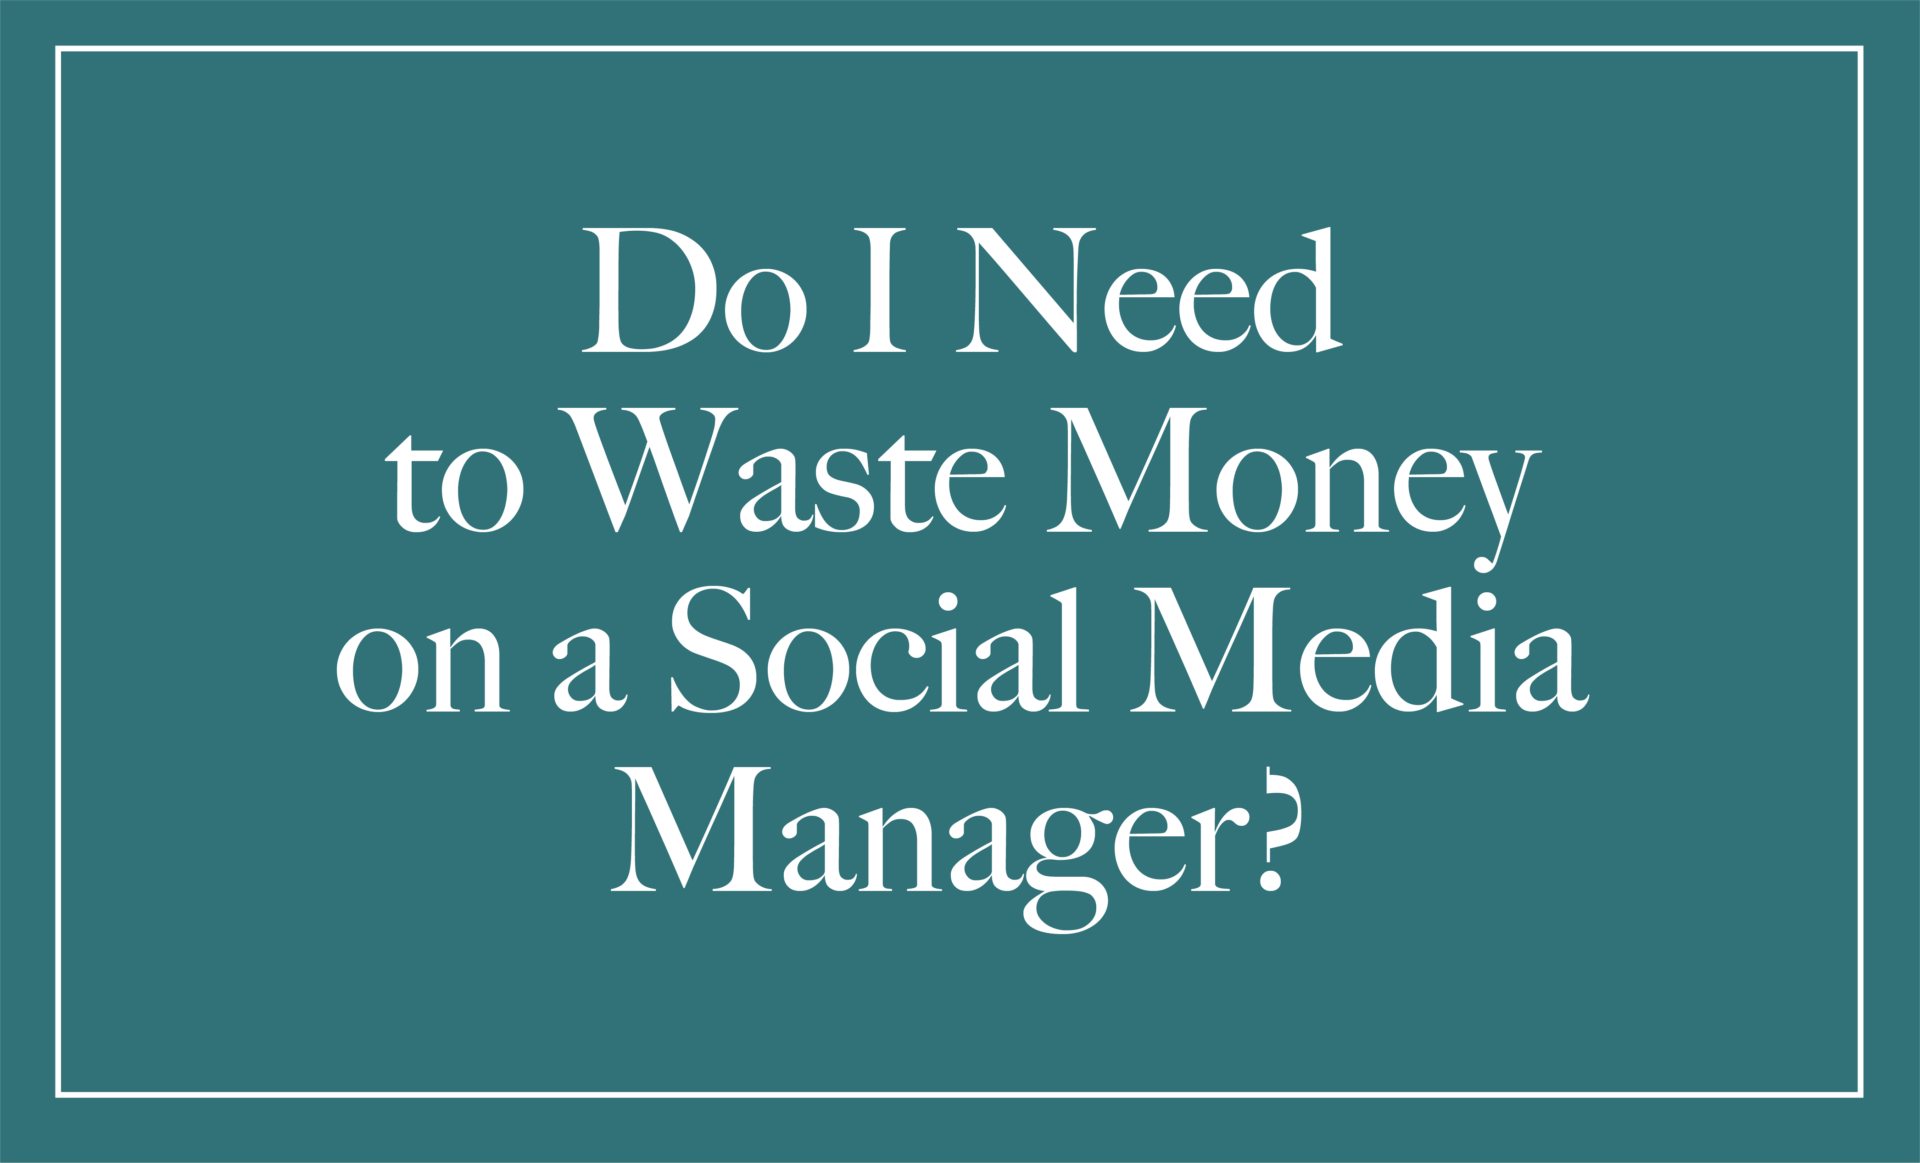 Green title card that says "Do I need to waste money on a social media manager?"